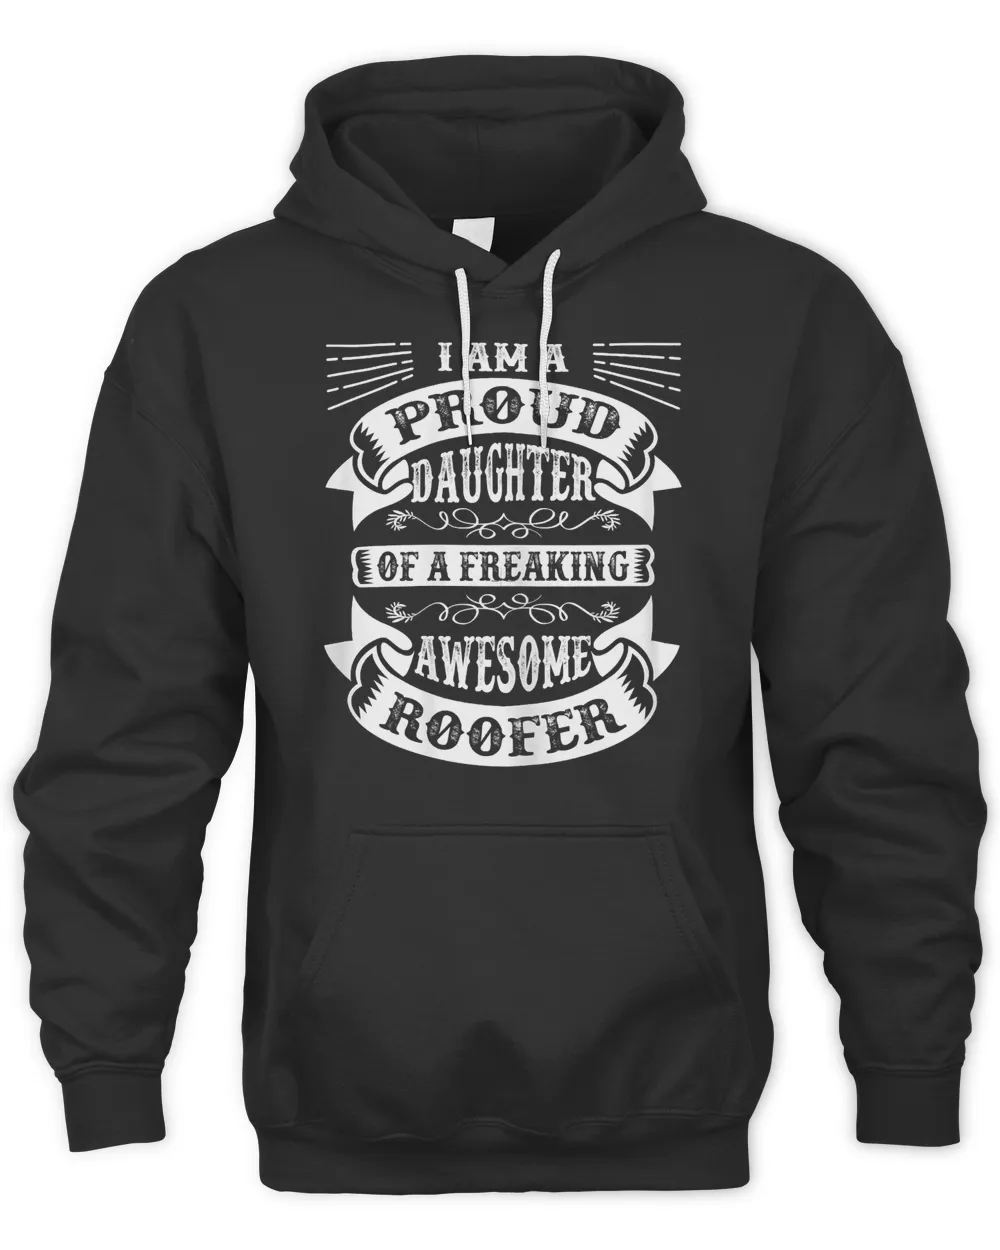 Proud Daughter of a Freaking Awesome Roofer Funny Roofing T-Shirt